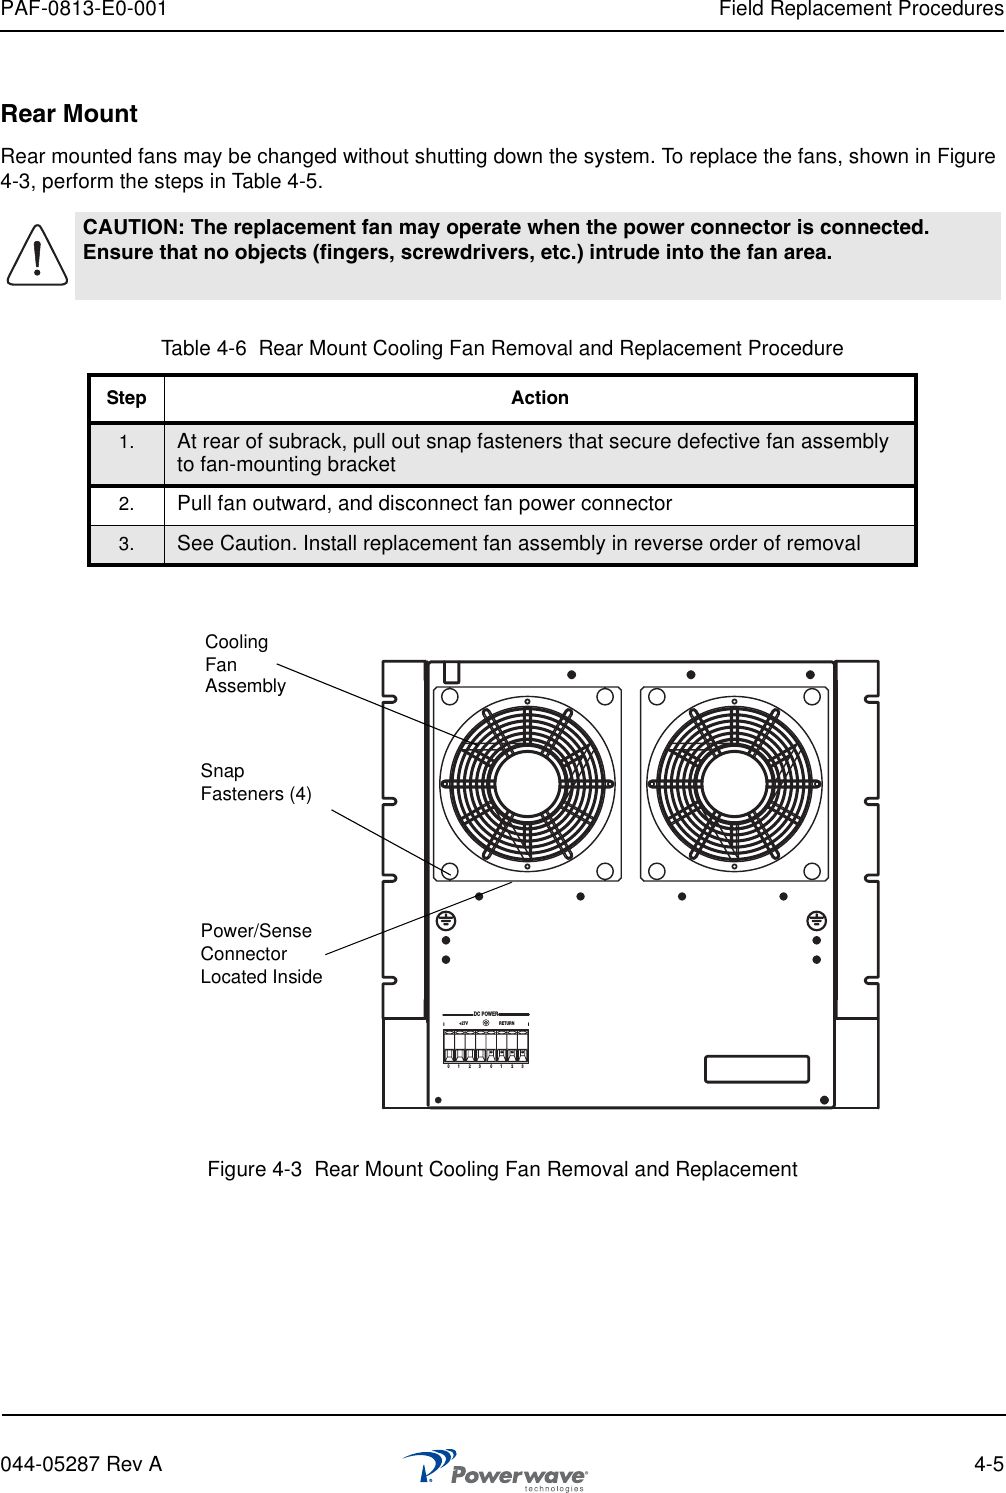 PAF-0813-E0-001 Field Replacement Procedures044-05287 Rev A 4-5Rear MountRear mounted fans may be changed without shutting down the system. To replace the fans, shown in Figure 4-3, perform the steps in Table 4-5.  Figure 4-3  Rear Mount Cooling Fan Removal and ReplacementCAUTION: The replacement fan may operate when the power connector is connected. Ensure that no objects (fingers, screwdrivers, etc.) intrude into the fan area.Table 4-6  Rear Mount Cooling Fan Removal and Replacement ProcedureStep Action1. At rear of subrack, pull out snap fasteners that secure defective fan assembly to fan-mounting bracket2. Pull fan outward, and disconnect fan power connector3. See Caution. Install replacement fan assembly in reverse order of removalDC POWER+27V RETURN0        1 2        3 0        1 2        3CoolingFanSnapFasteners (4)Power/Sense ConnectorLocated InsideAssembly